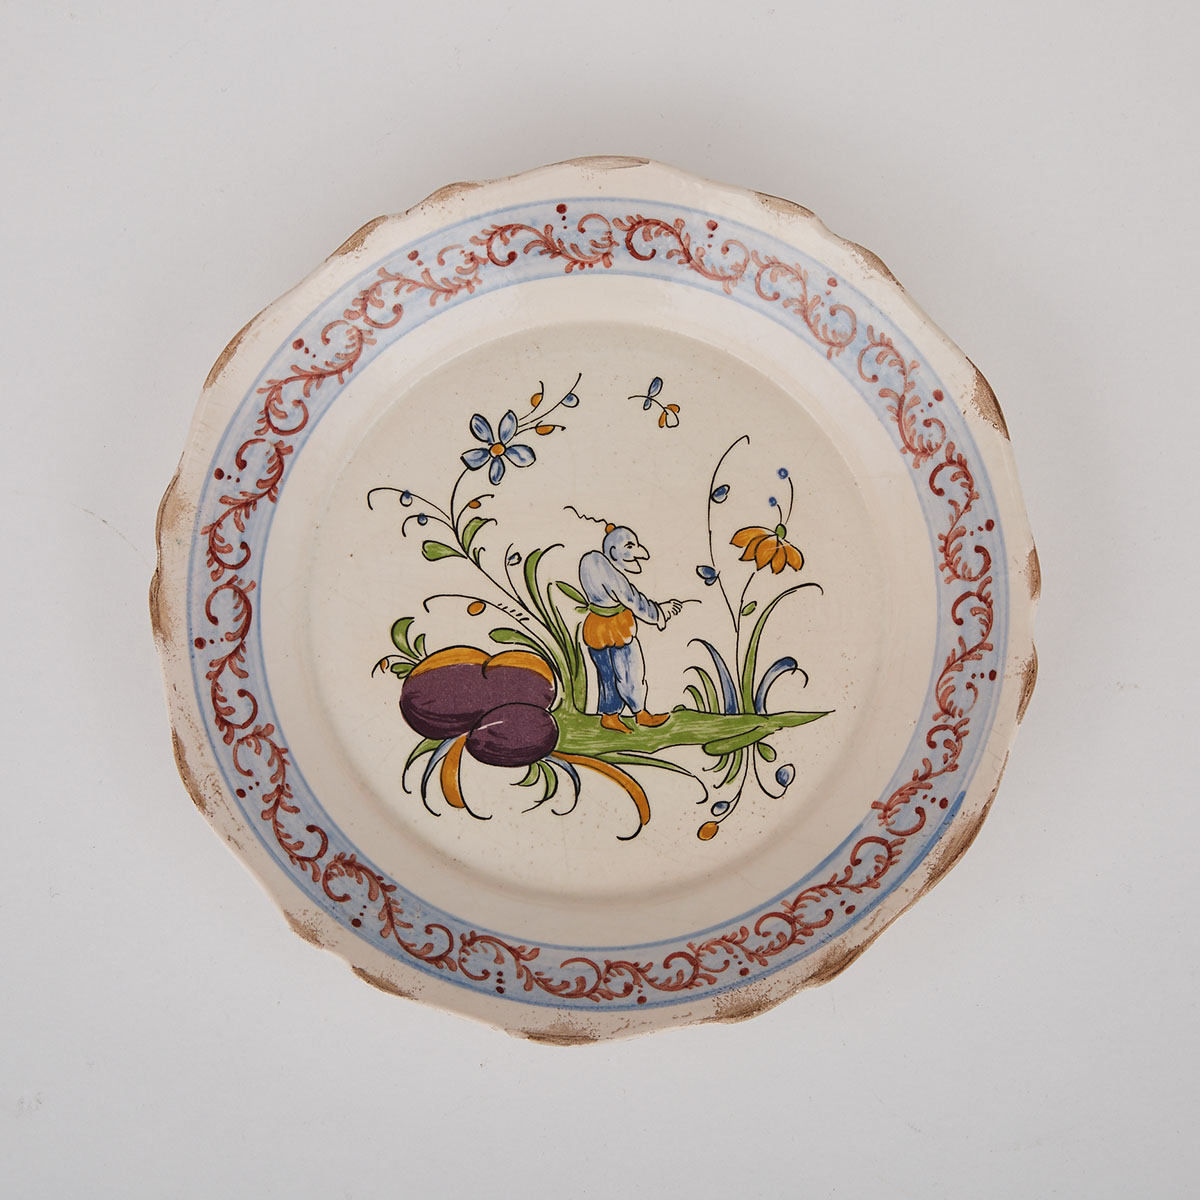 French Polychrome Painted Faience Plate, Meillonas or La Tronche-Près-Grenoble, late 18th century